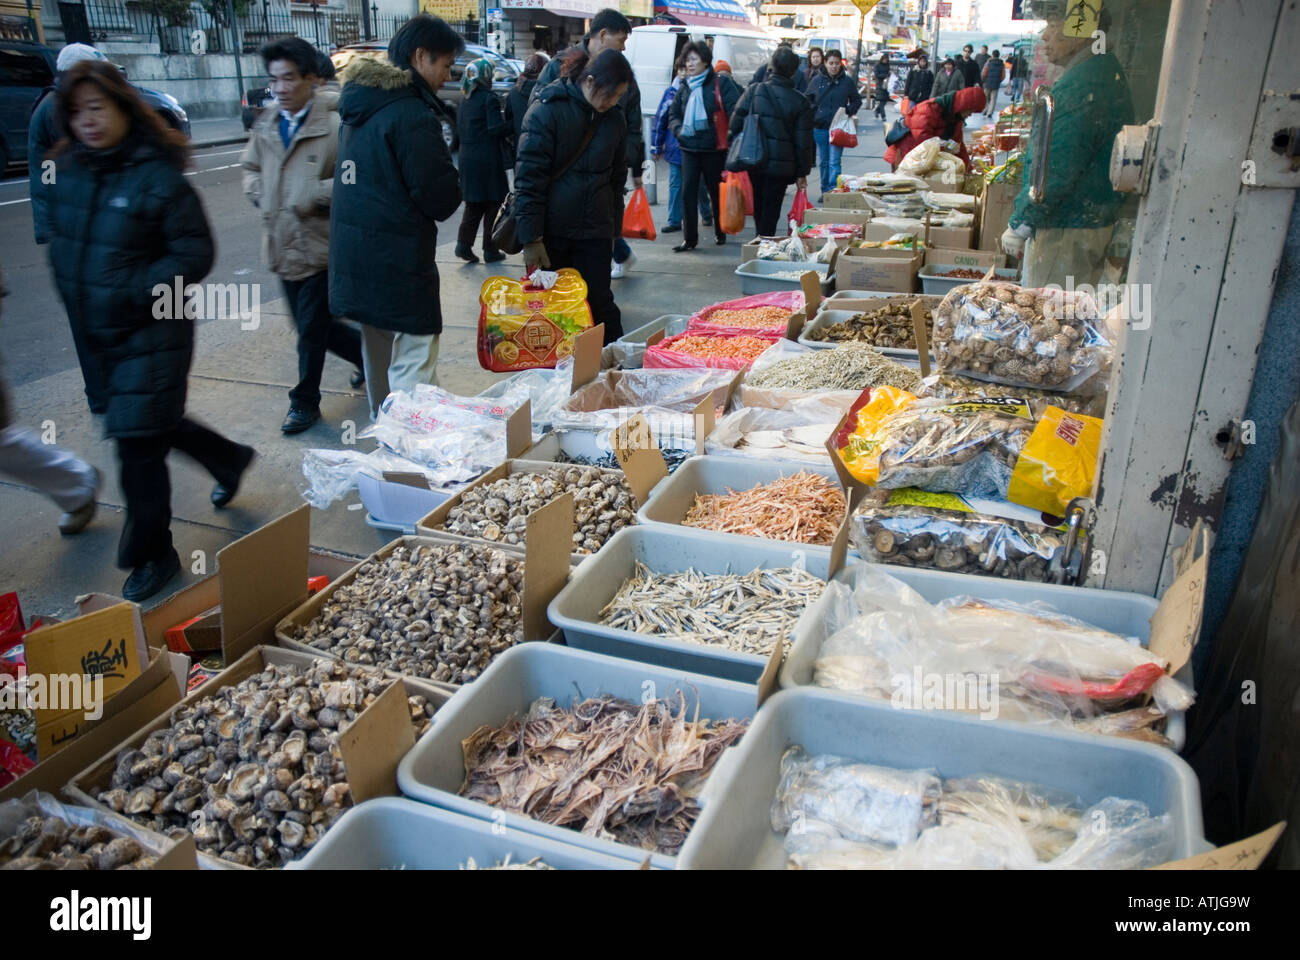 Outdoor market in Chinatown, New York City Stock Photo